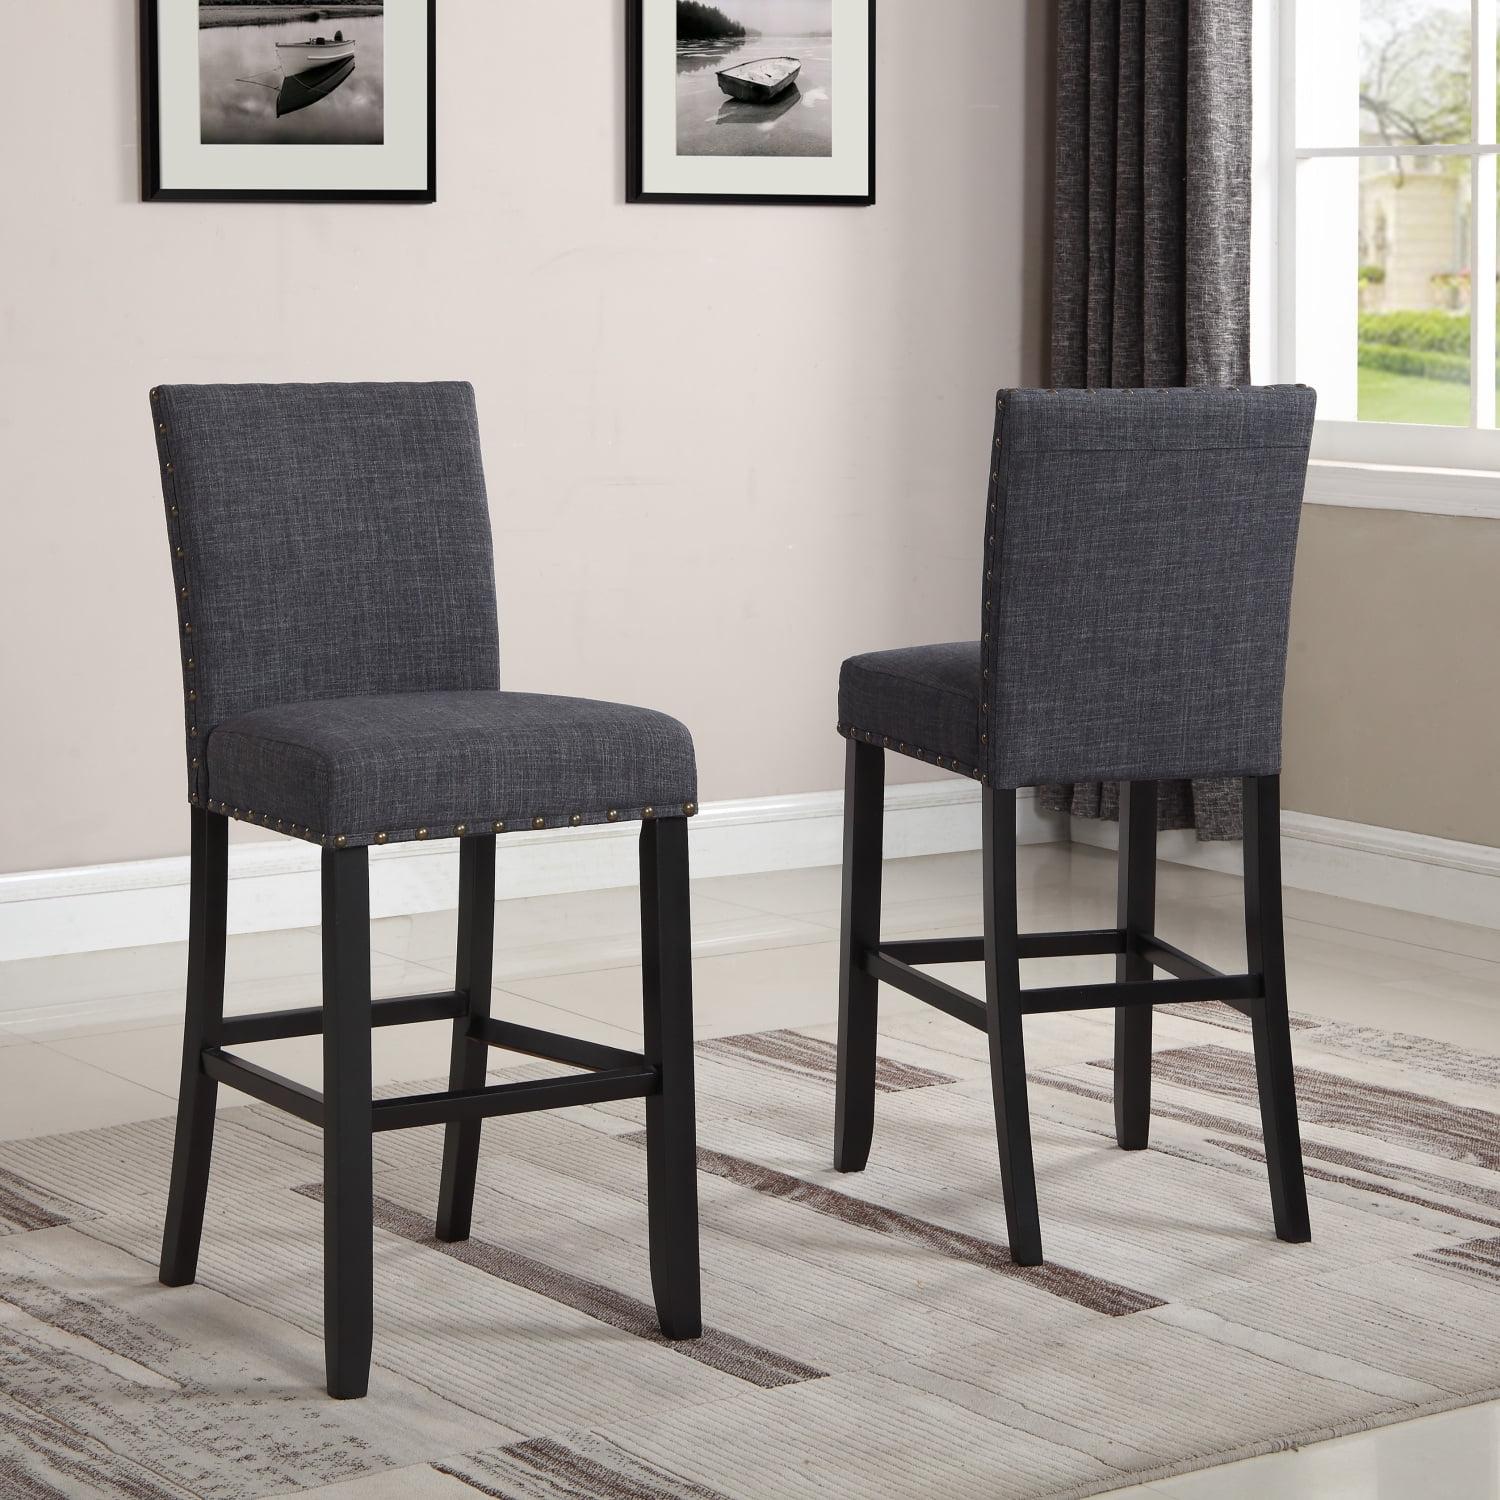 Espresso Hardwood Contemporary Bar Stools with Gray Linen Upholstery, Set of 2